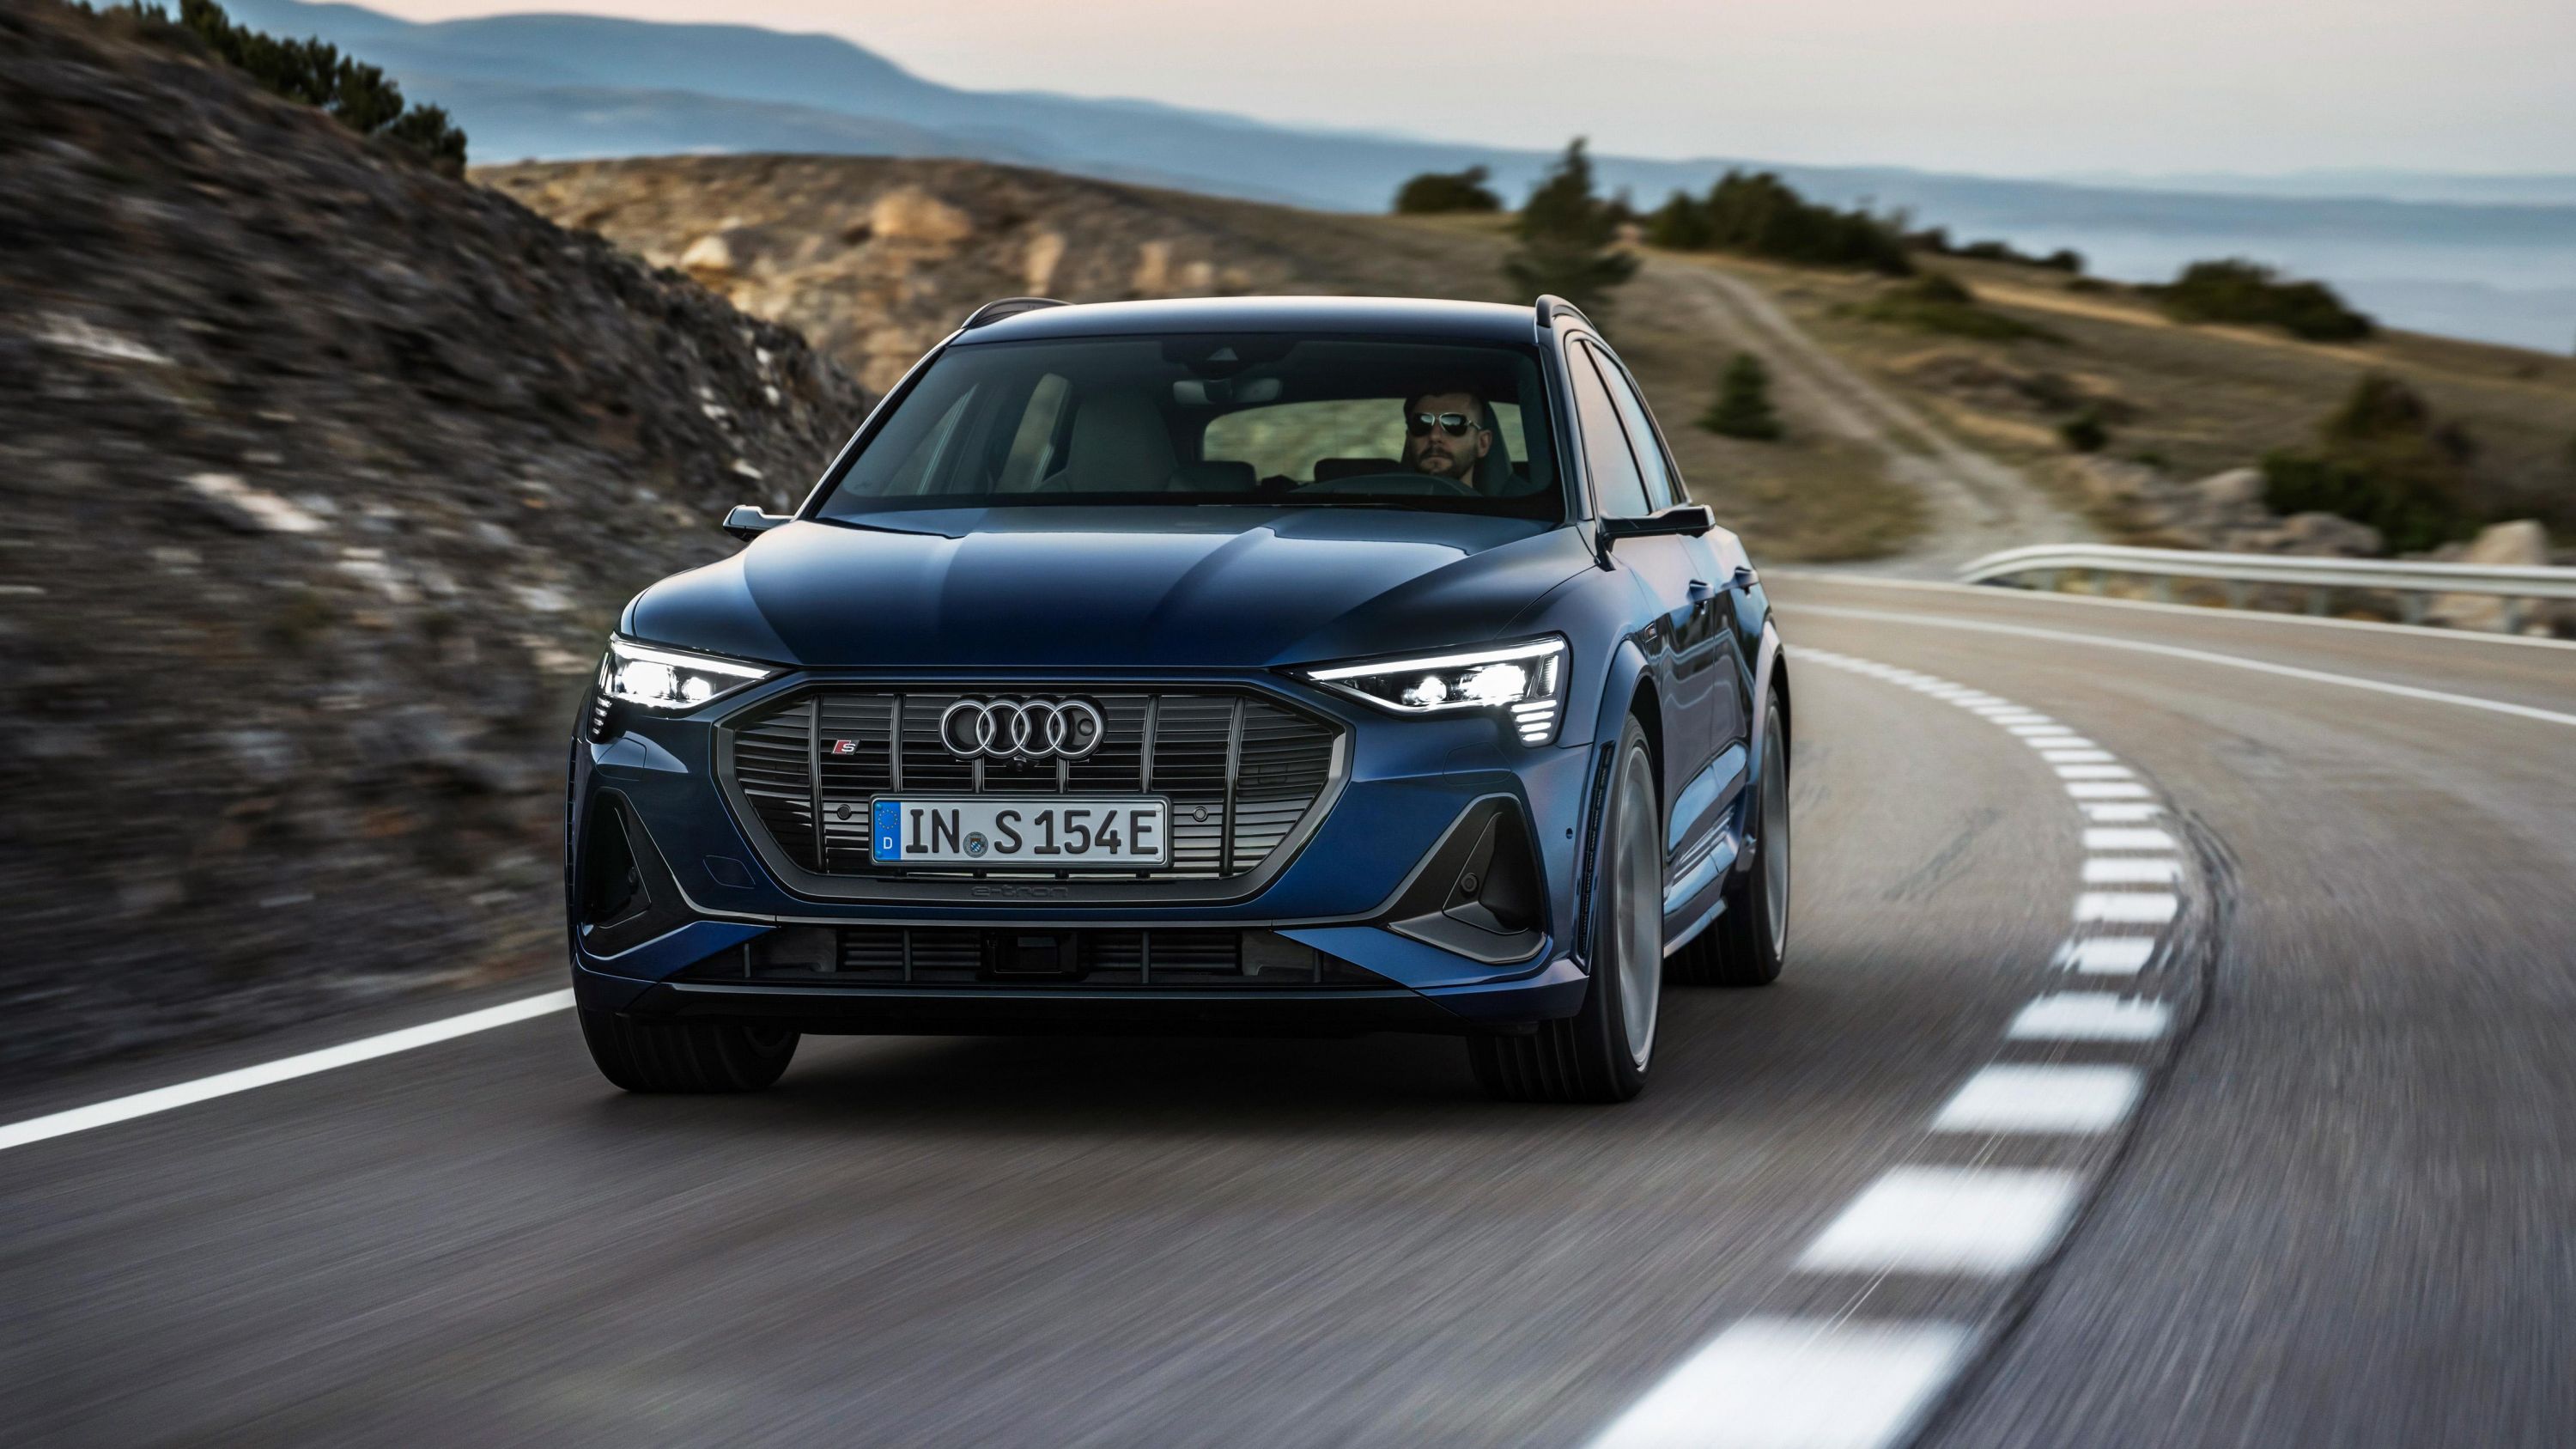 2022 Audi e-tron S priced from $165,600 ...